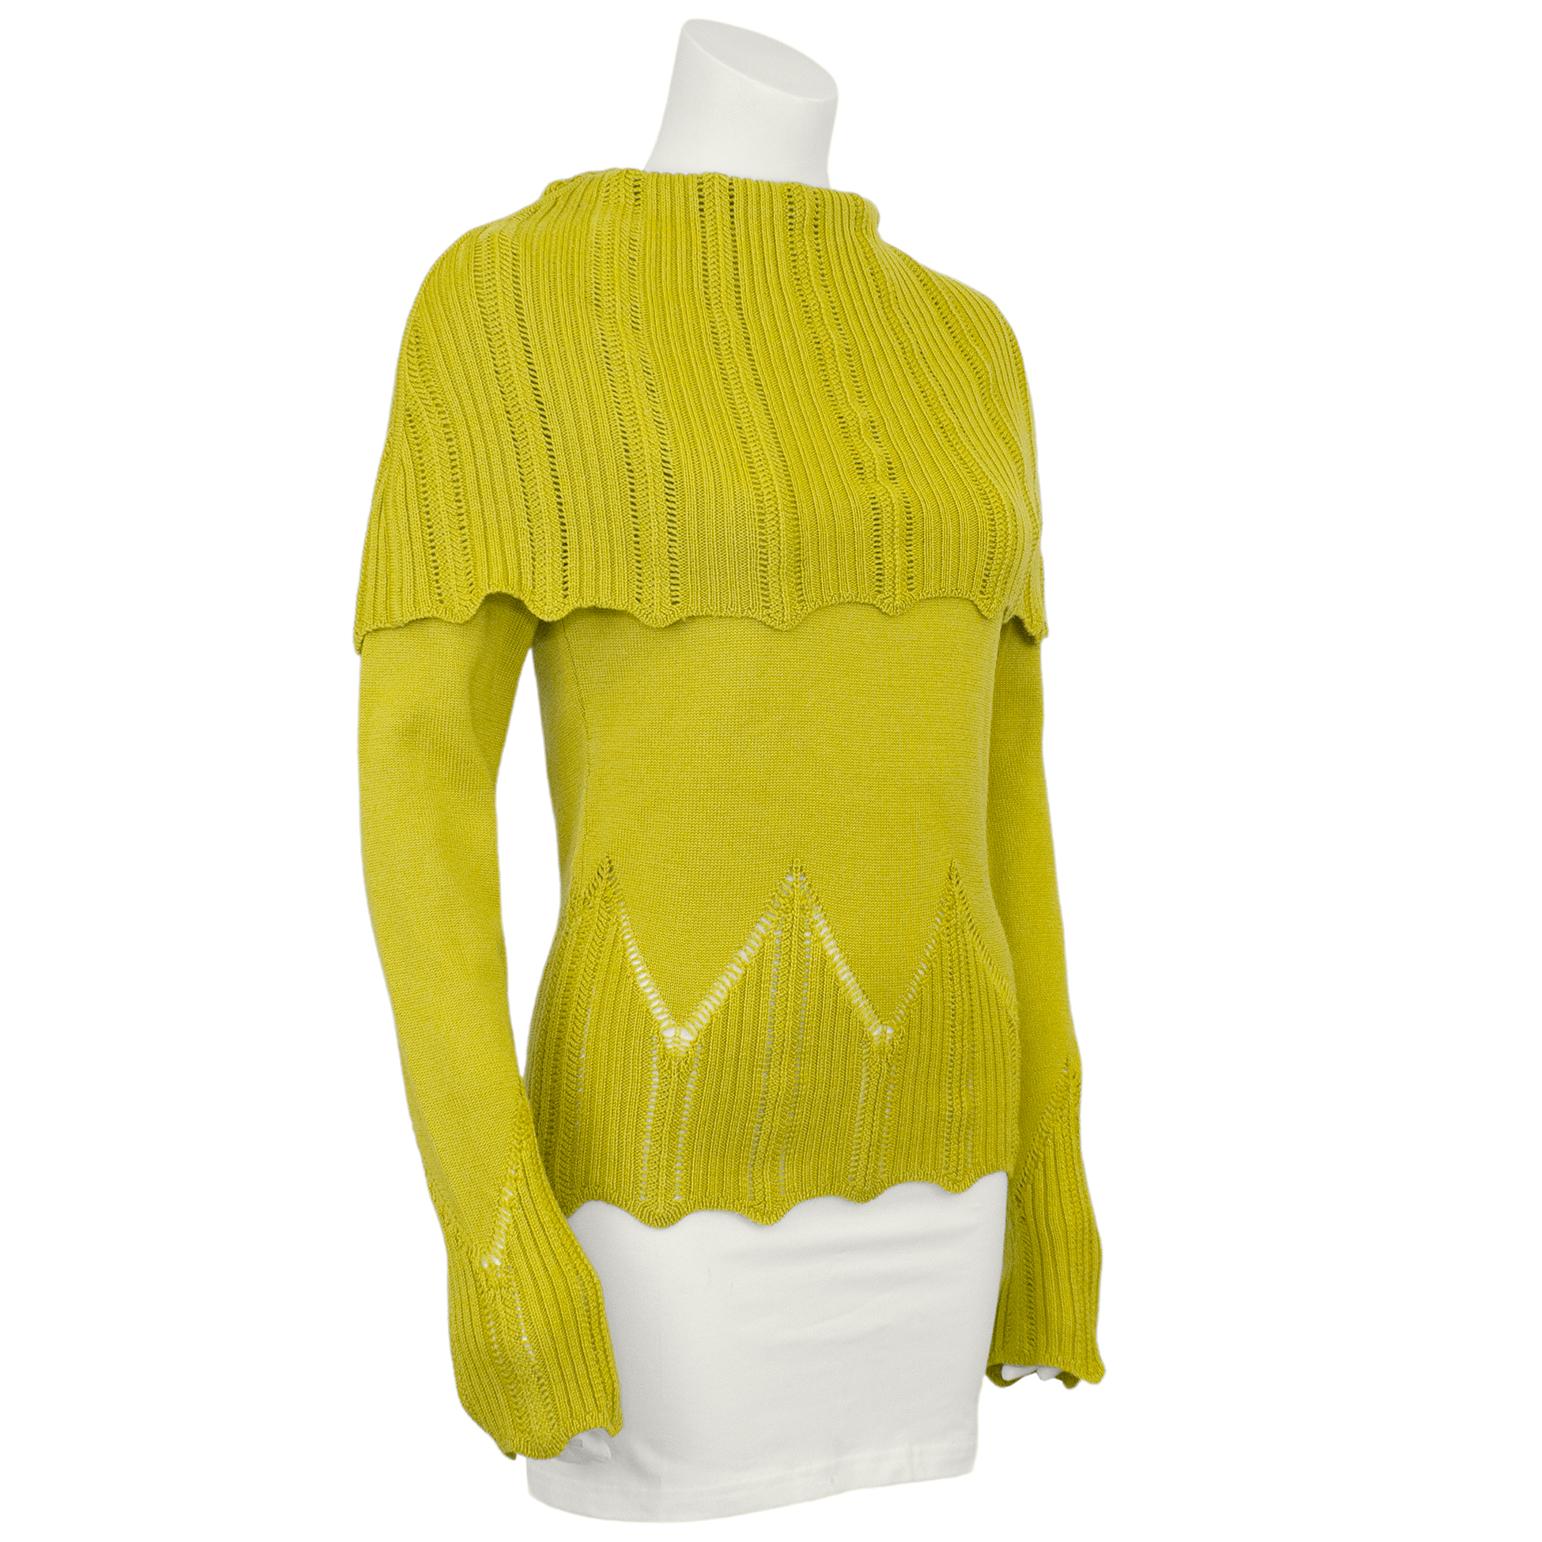 Bright and beautiful chartreuse wool knit Christian Dior pull over sweater from the early 2000s. The sweater is crafted from a tight knit through the arms and body, but the fold over shoulder, cuffs and hem feature a more open eyelet knit with